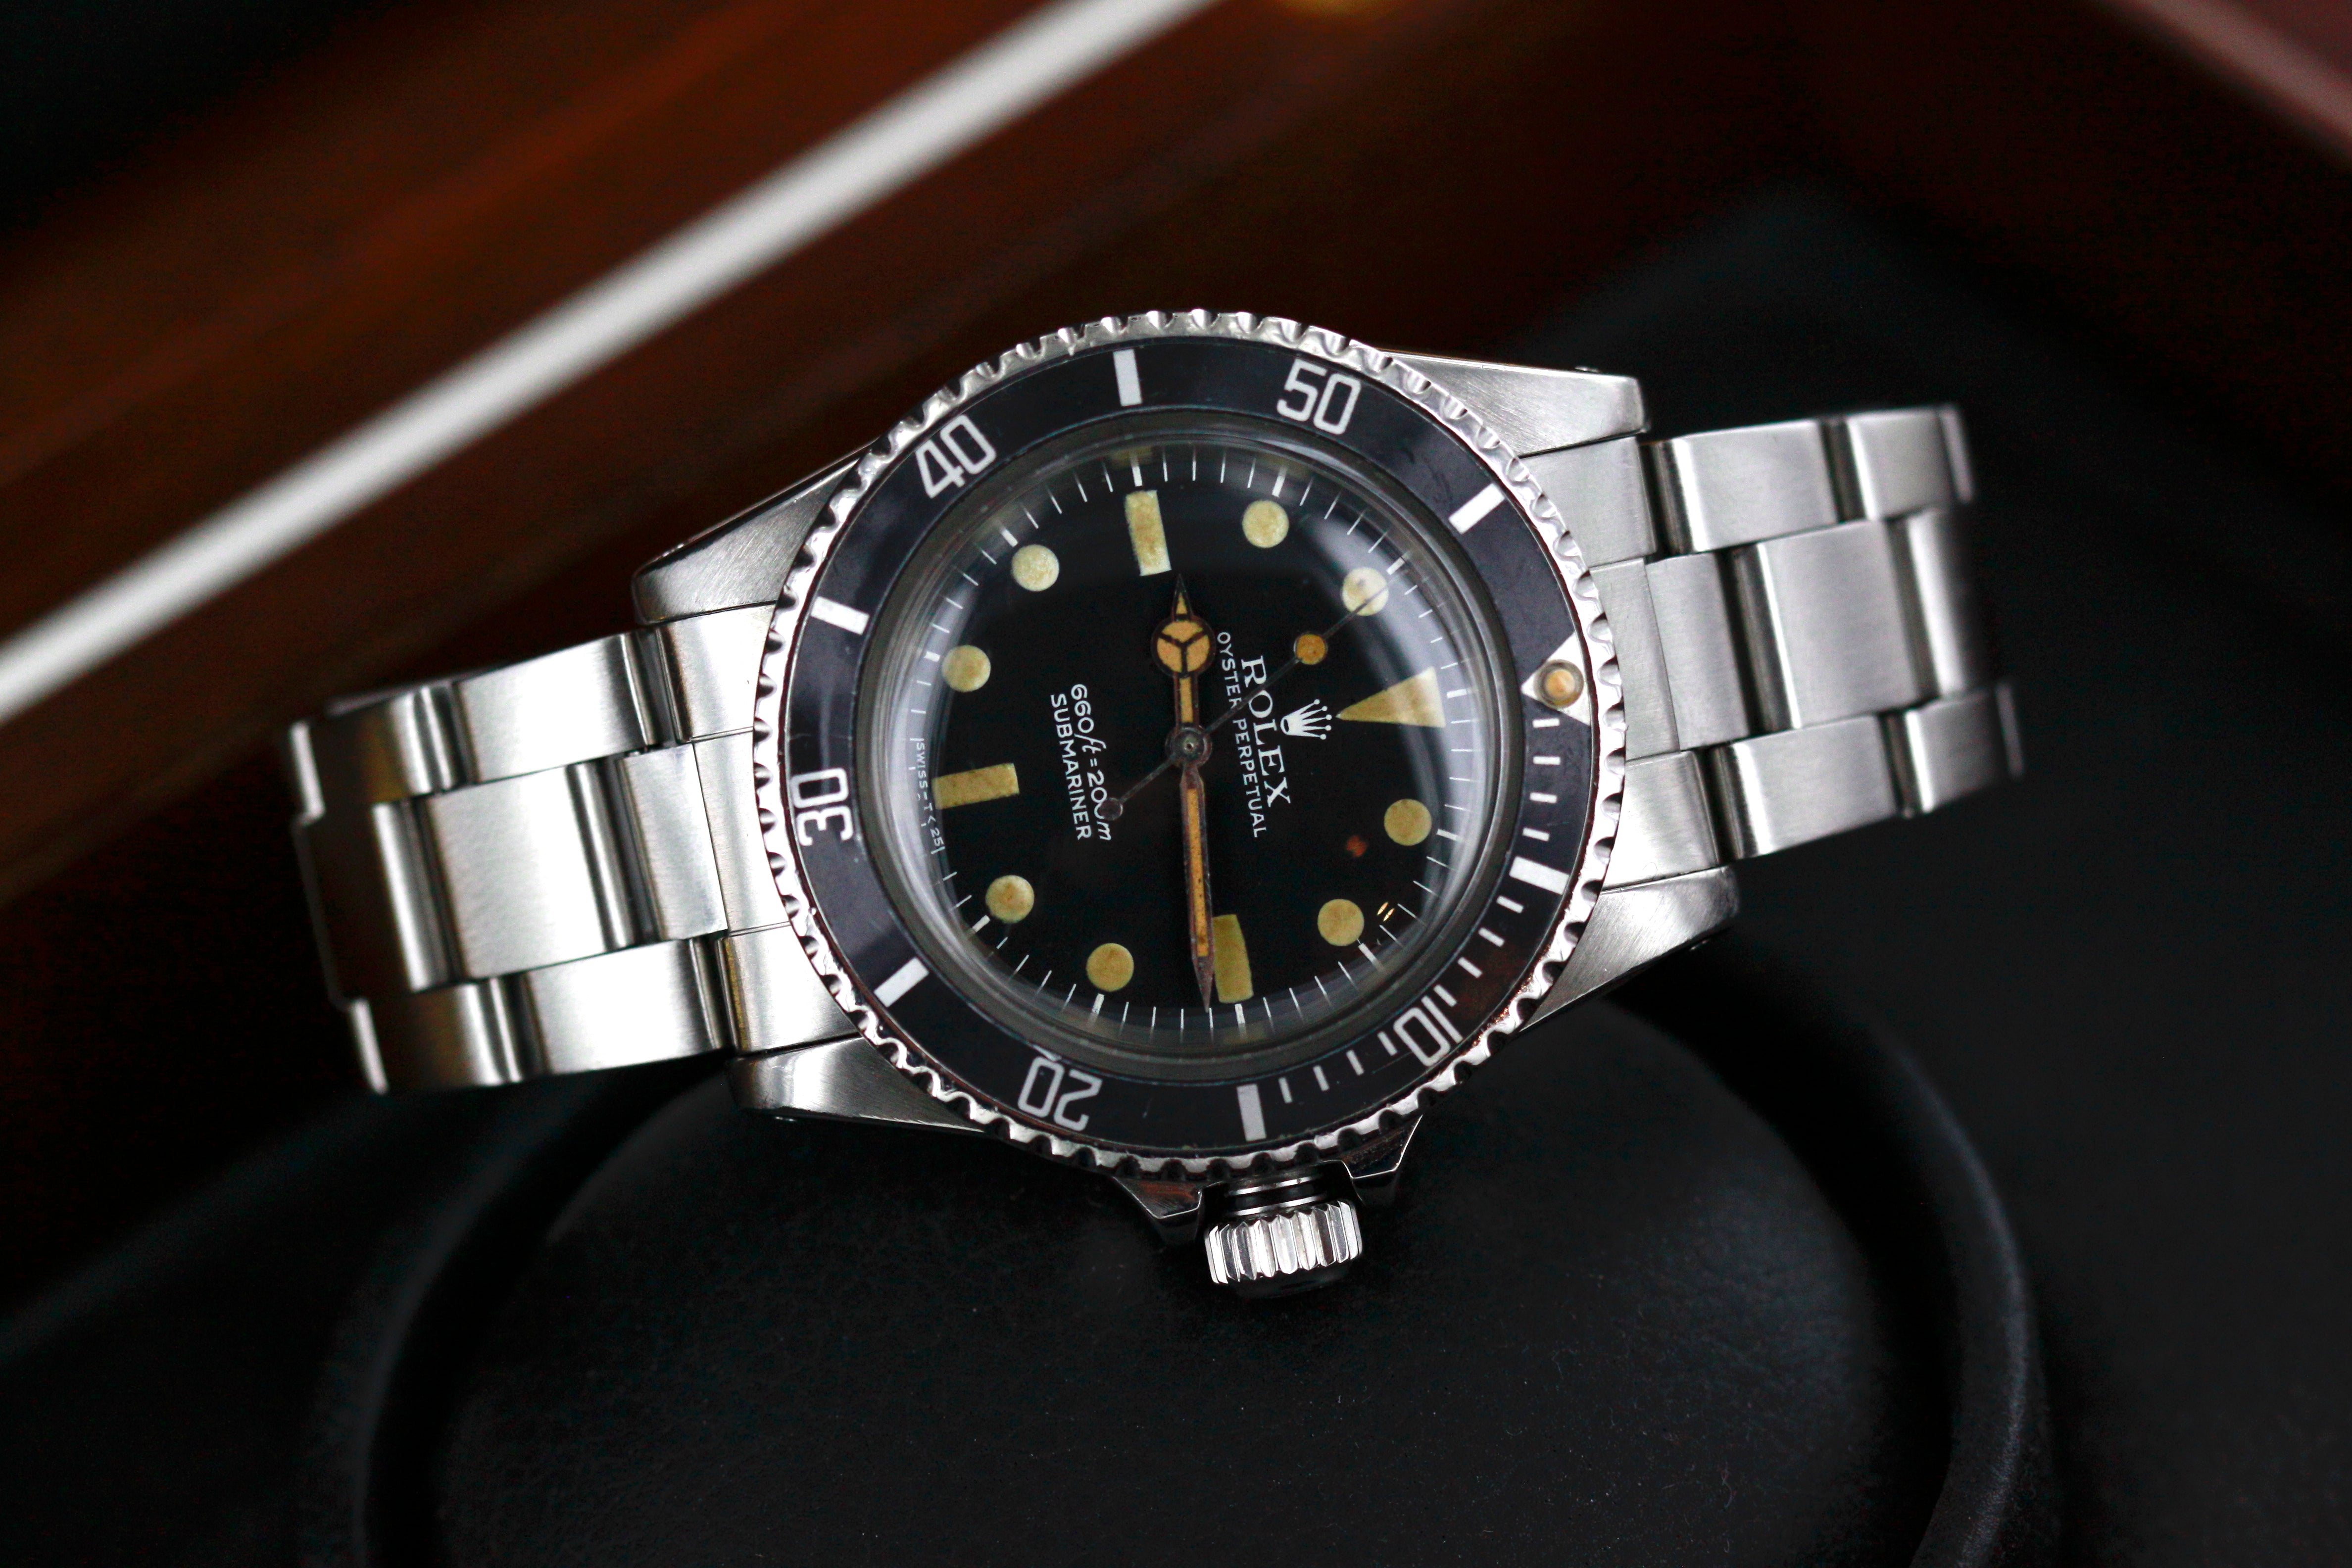 Rolex Submariner Referenz 5513 MAXI DIAL FROM 1977